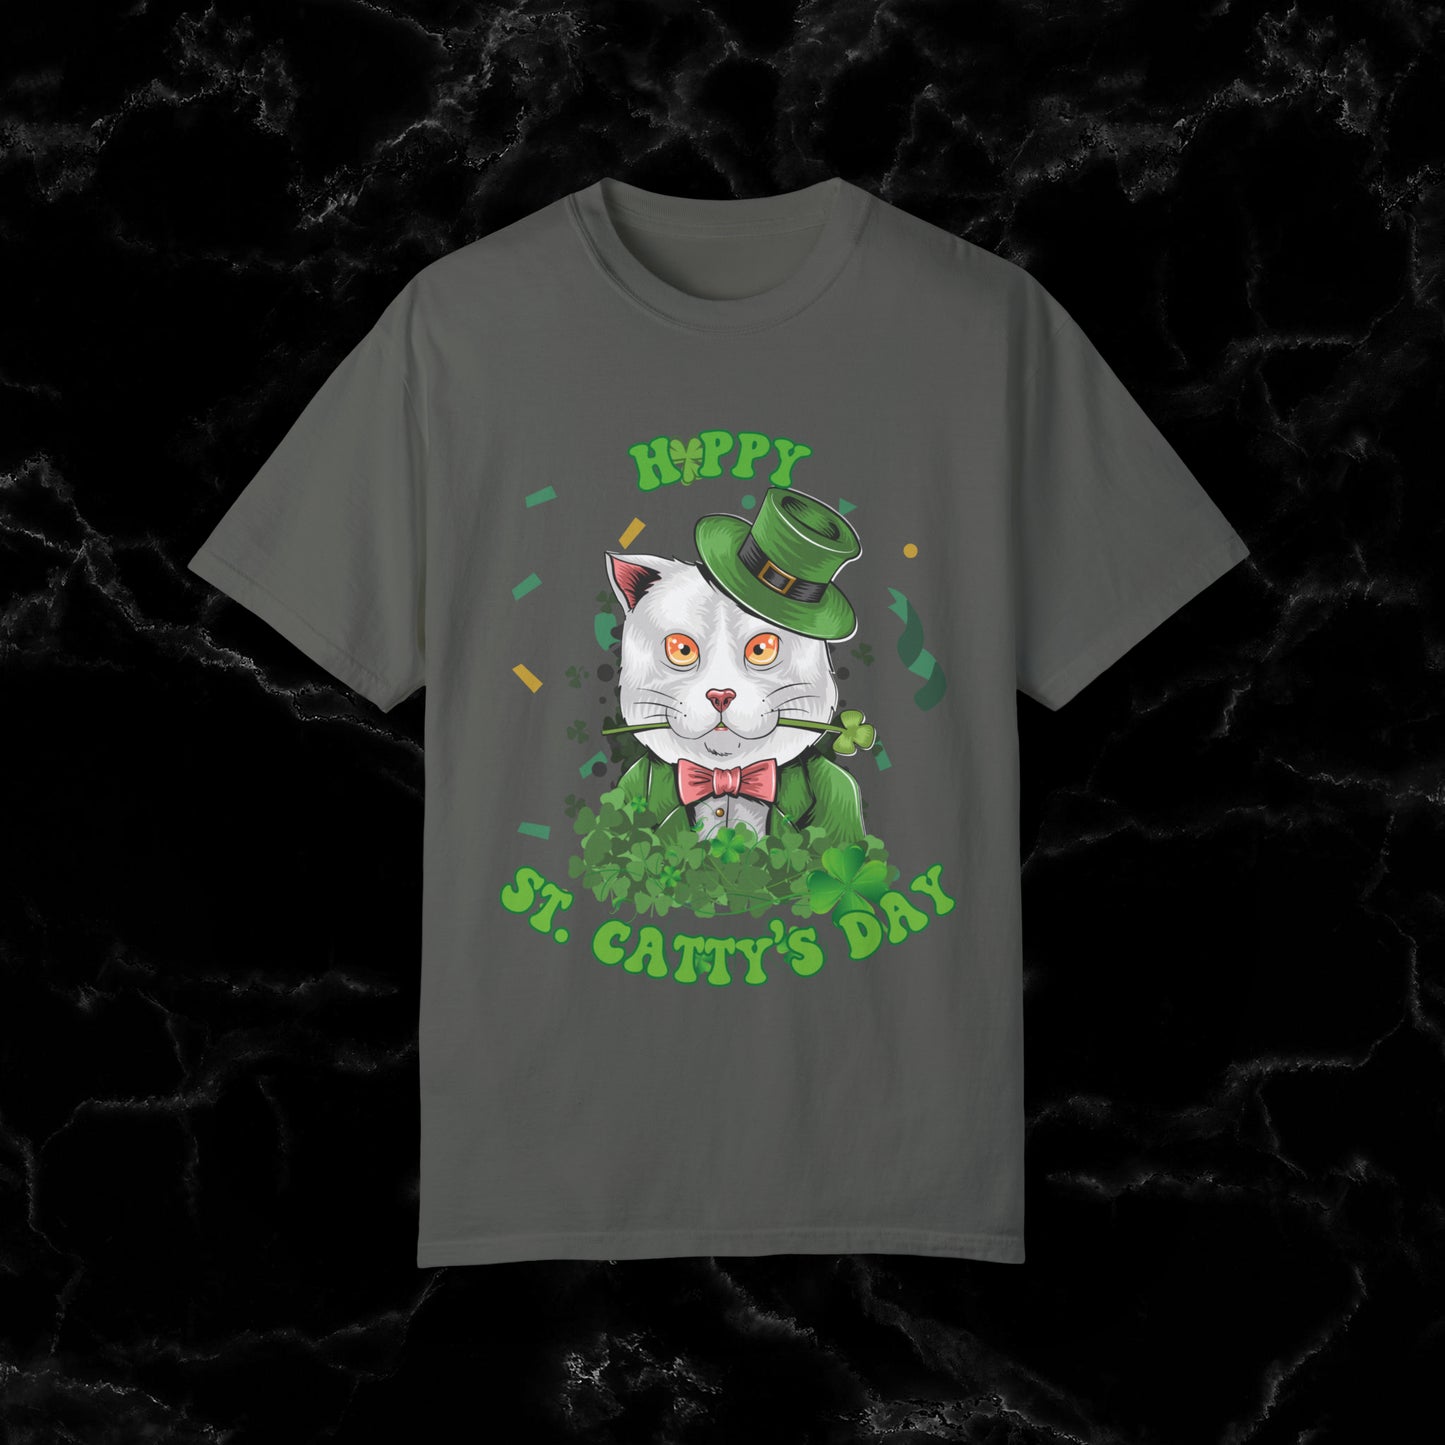 Happy St. Catty's Day Funny St. Patrick's Day Comfort Colors T-Shirt - St. Paddy's Day Shirt for Cat Lover St. Patty's Day Fun T-Shirt Pepper S 